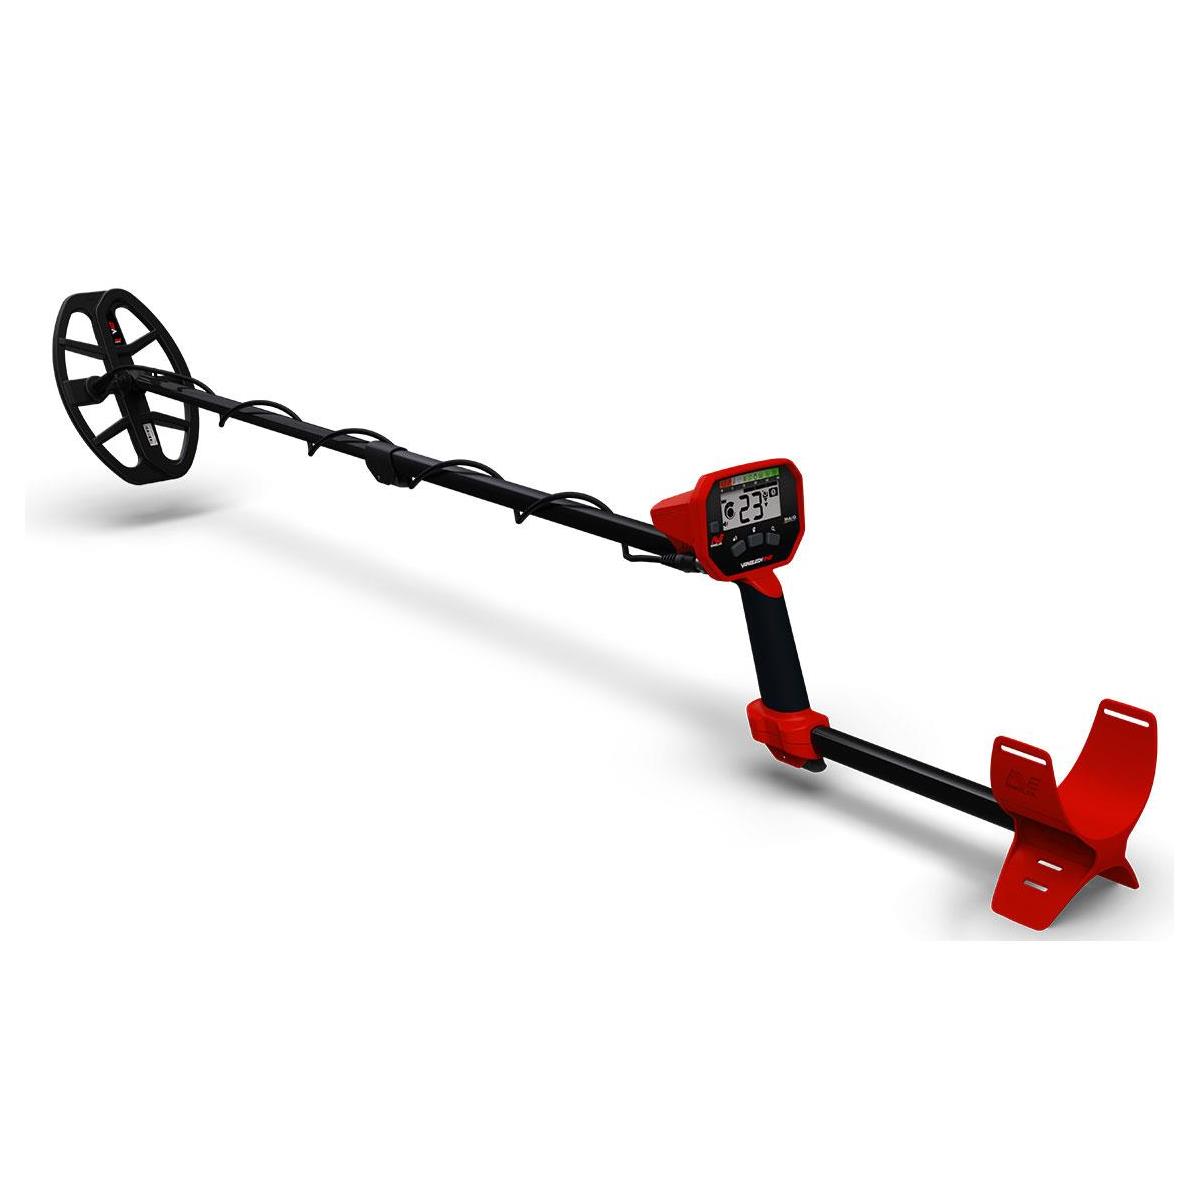 

Minelab VANQUISH 340 Metal Detector, 10x7" Double-D Coil, Multi-IQ VLF Frequency